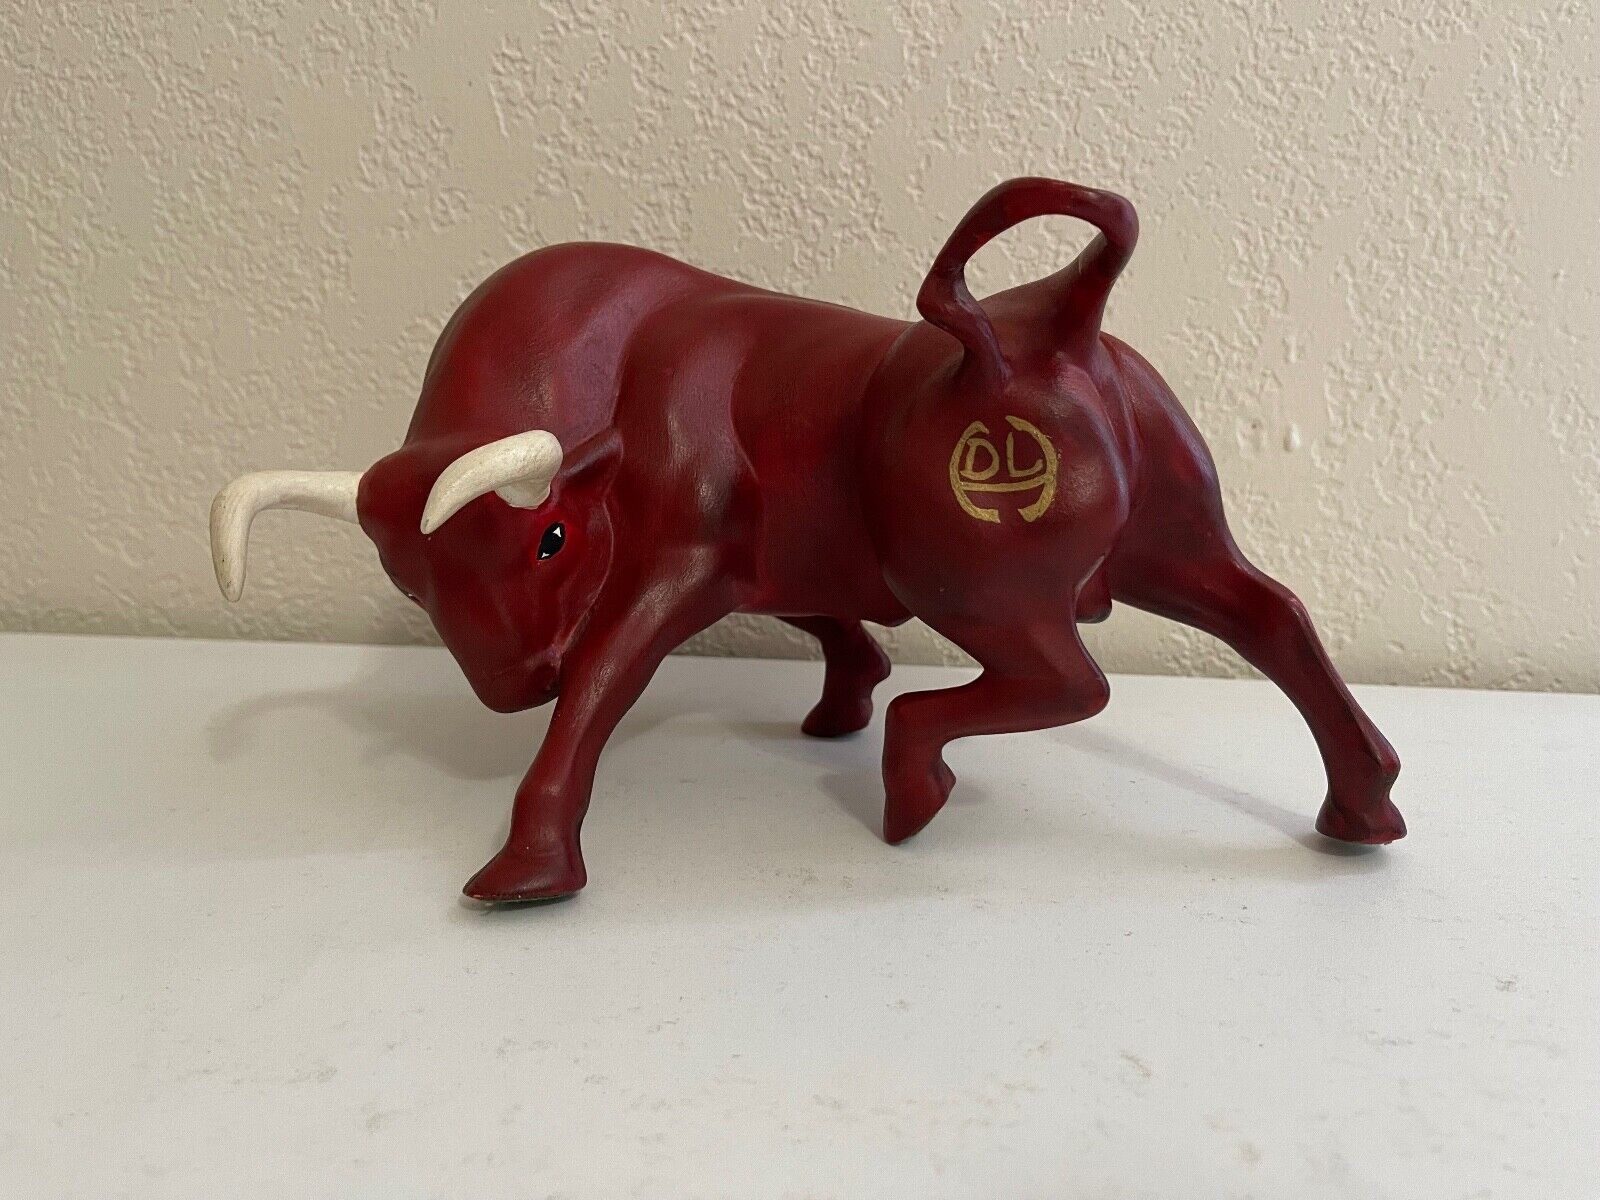 Vintage Red Painted Ceramic Bull Figurine Signed HDL